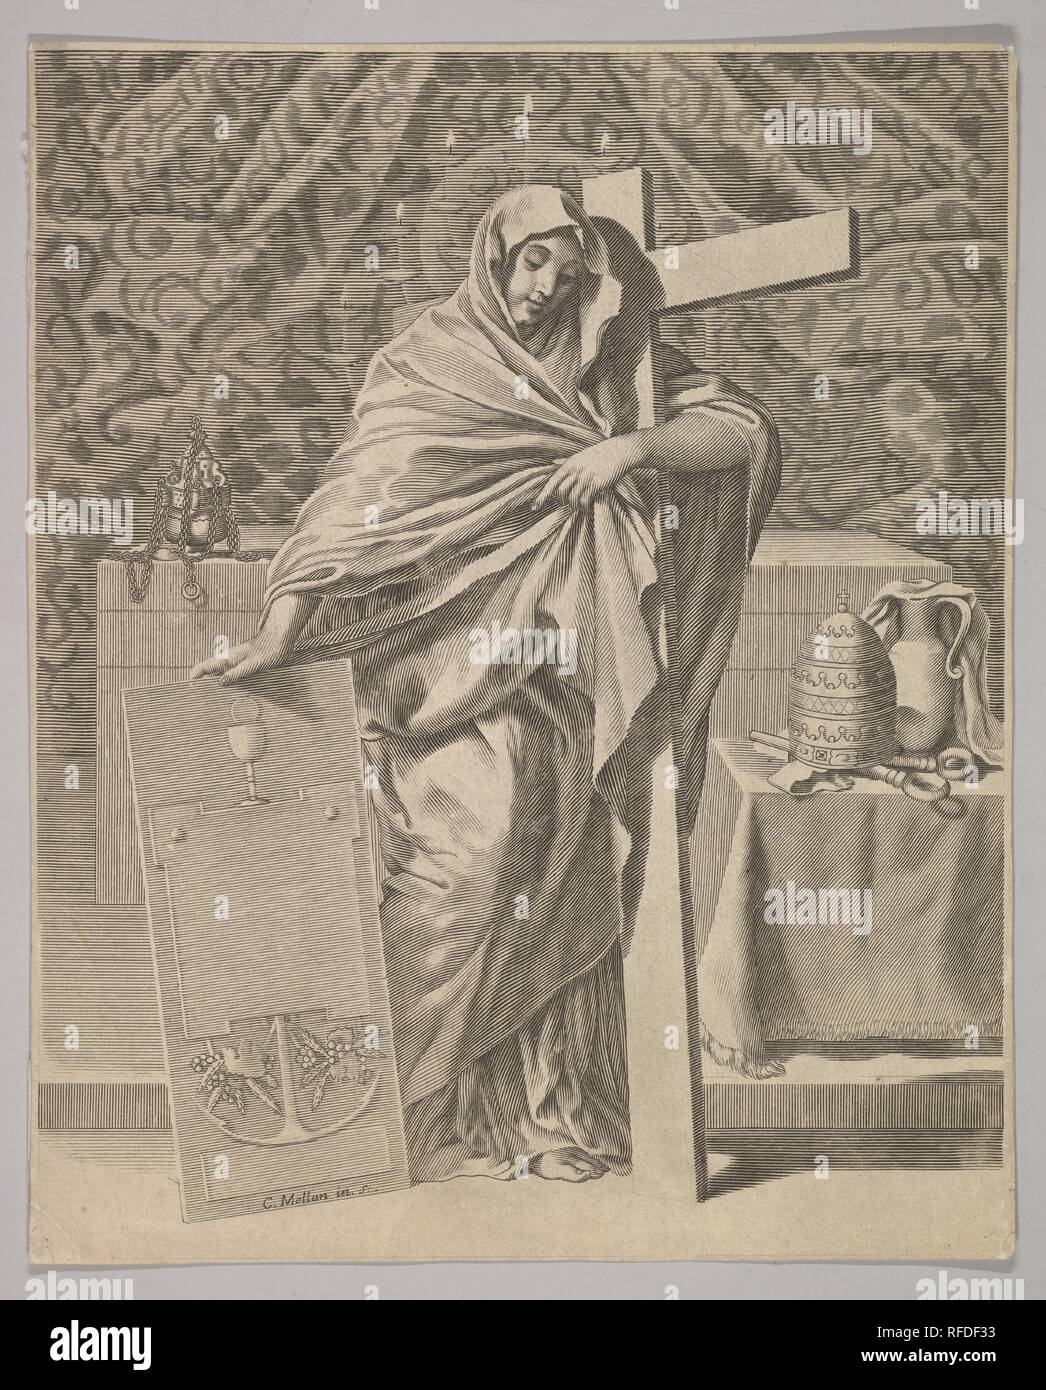 Personification of Faith. Artist: Claude Mellan (French, Abbeville 1598-1688 Paris). Dimensions: sheet: 11 7/16 x 9 1/4 in. (29.1 x 23.5 cm). Date: 1642. Museum: Metropolitan Museum of Art, New York, USA. Stock Photo